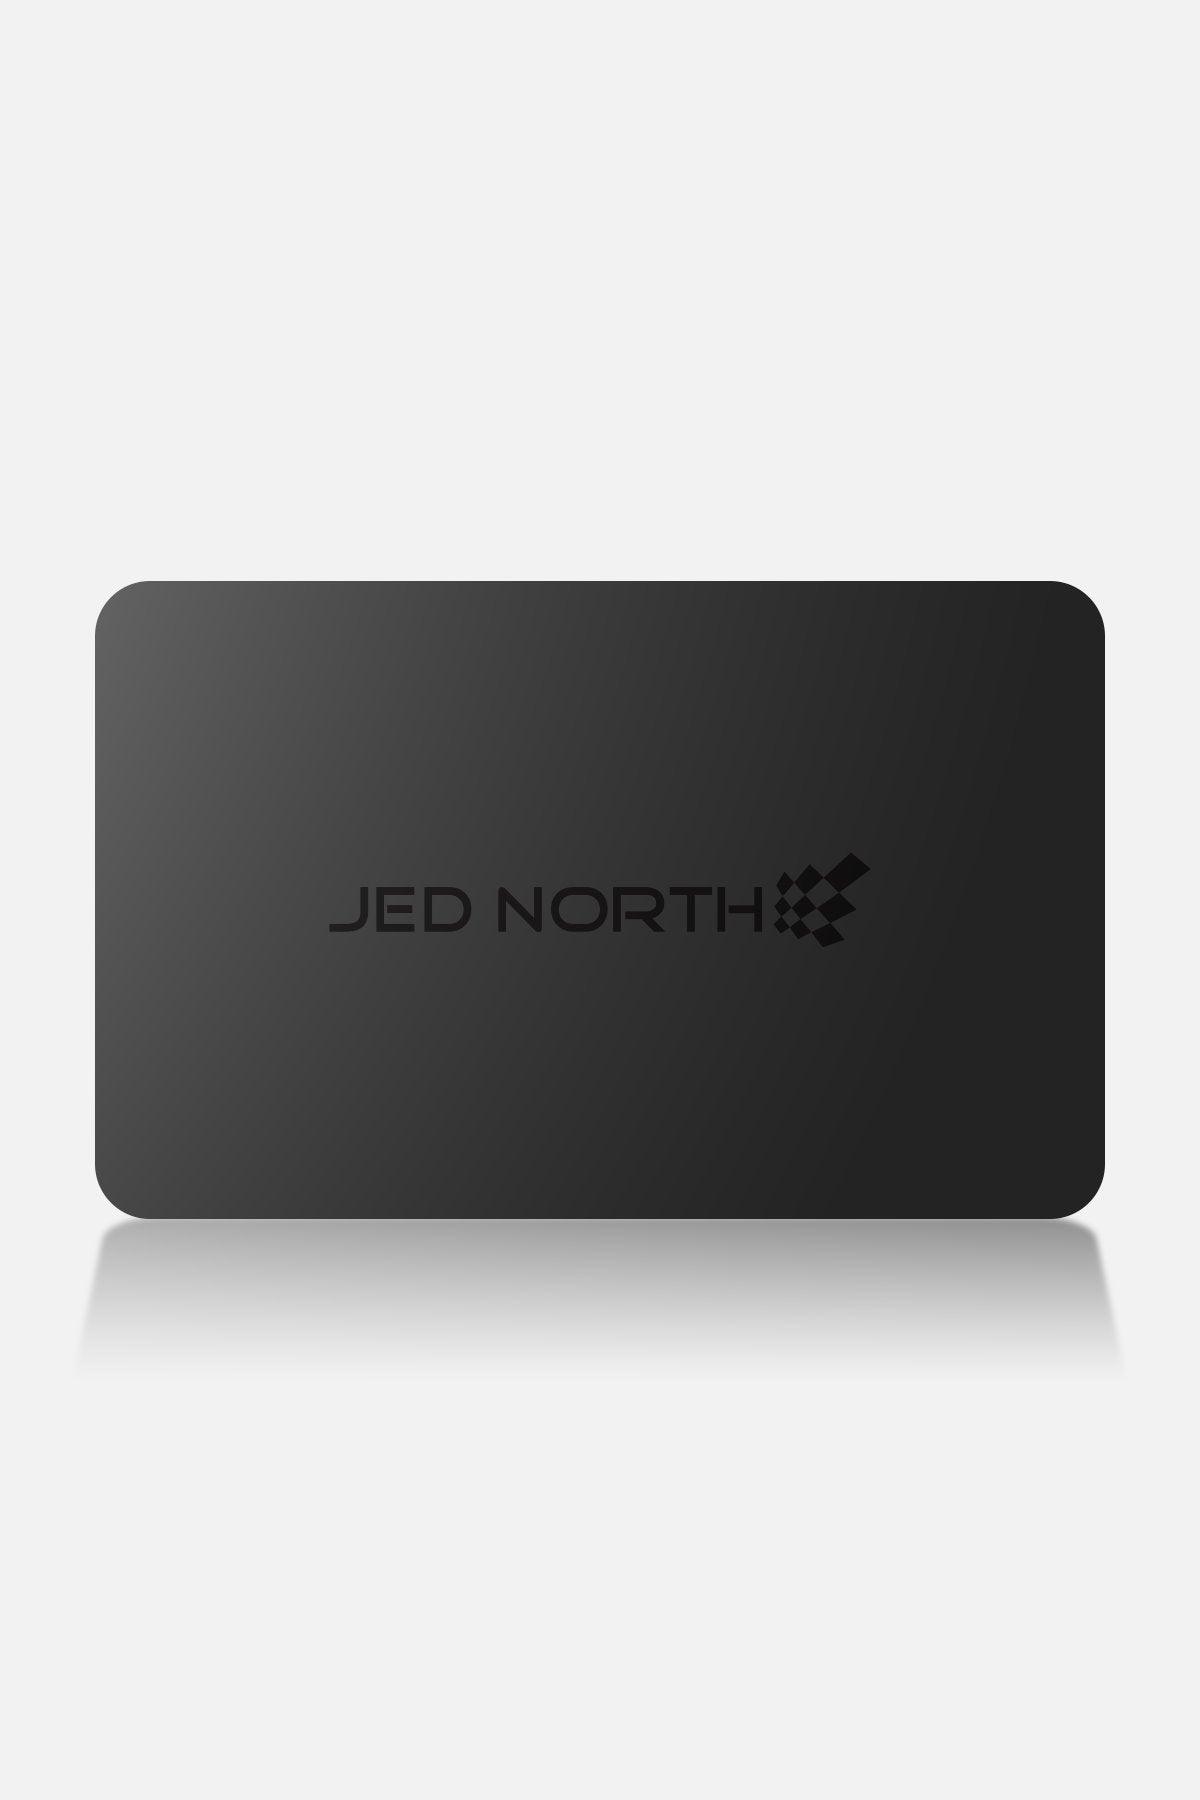 $50 Gift Card Gift Cards Jed North 